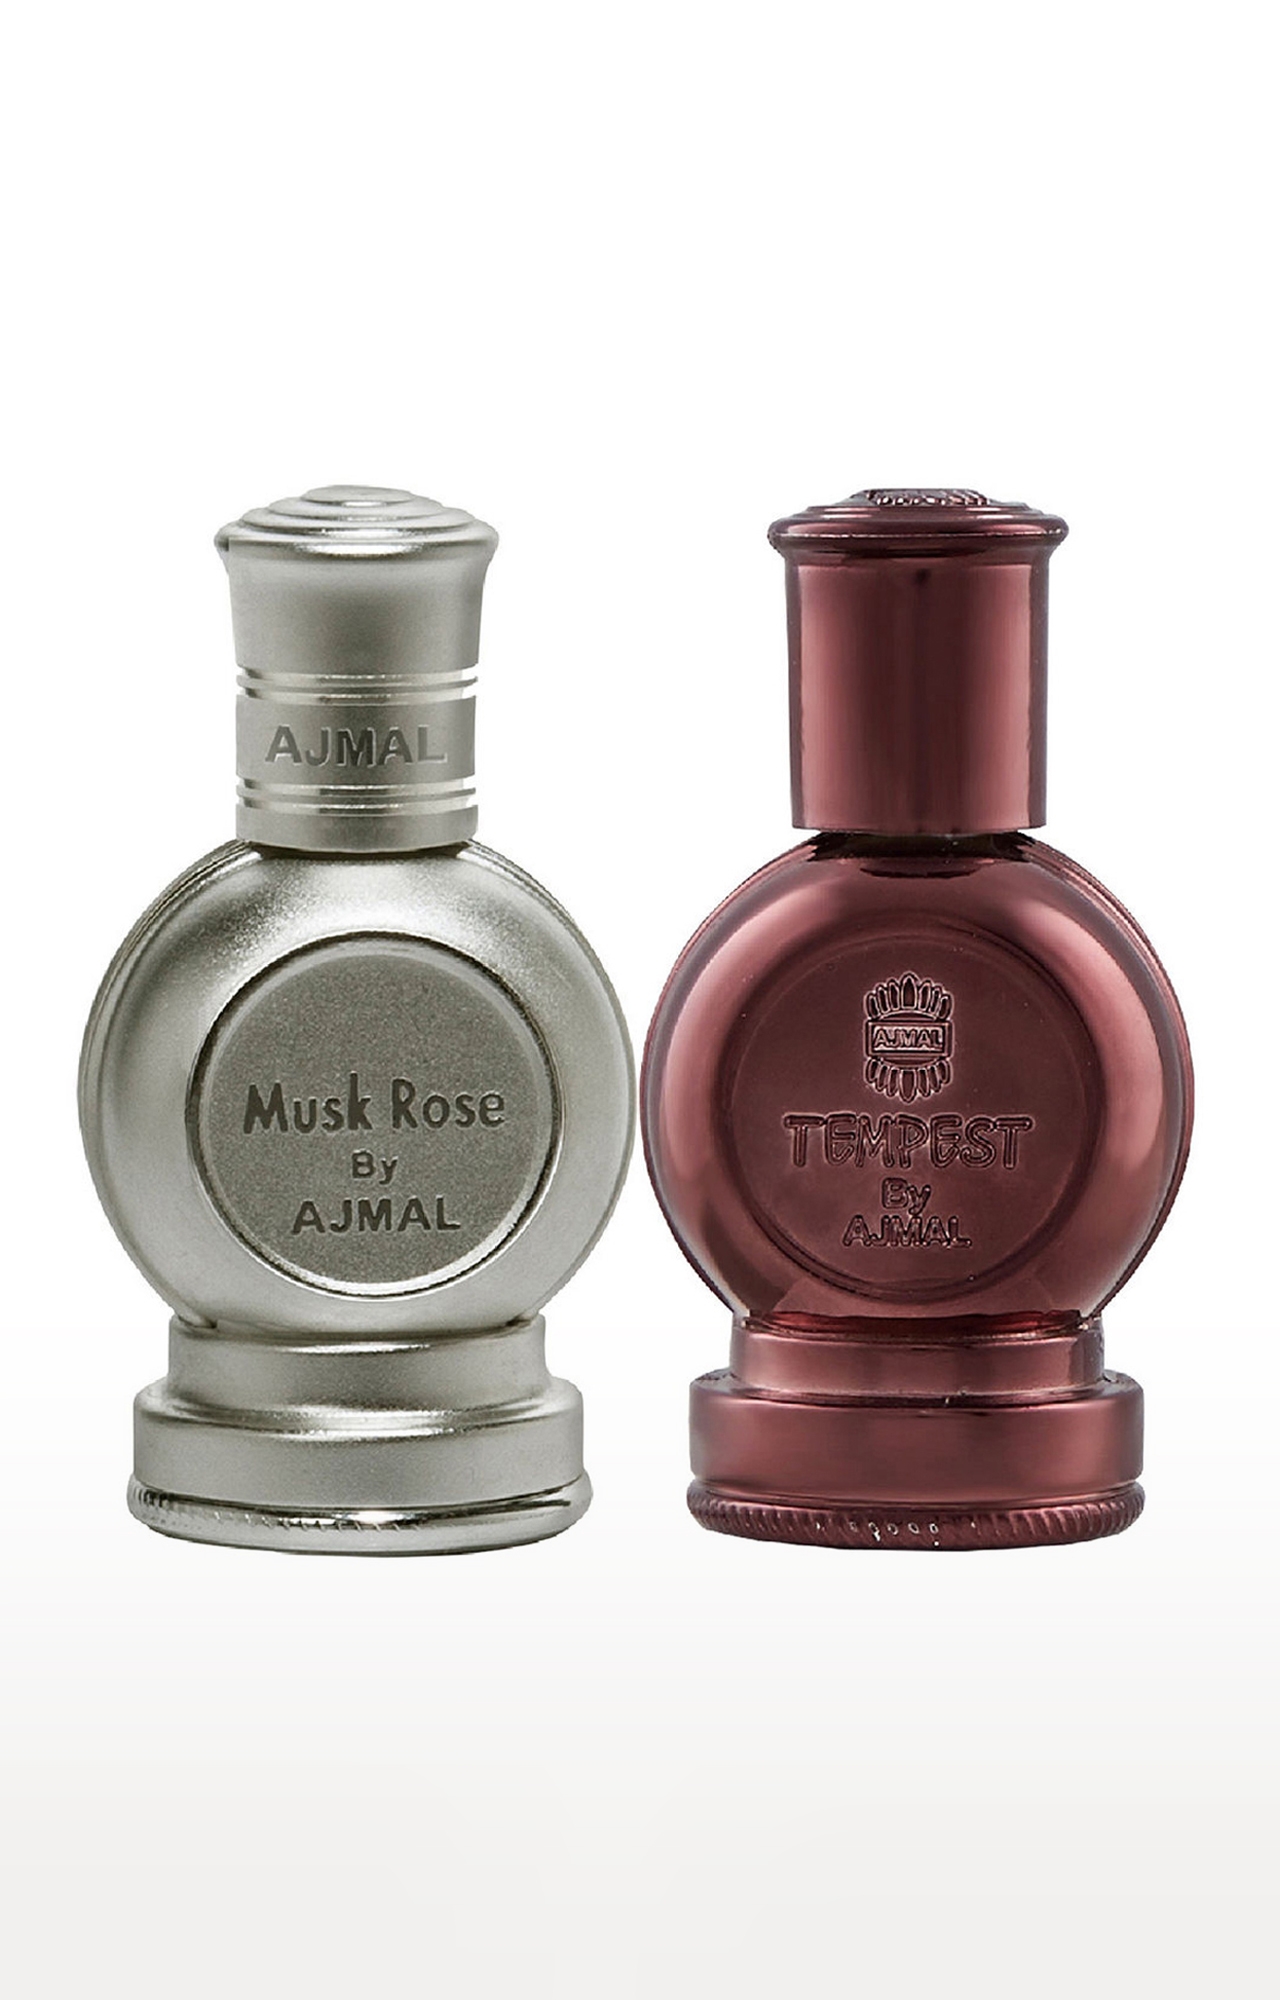 Ajmal | Ajmal Musk Rose Concentrated Perfume Oil Musky Alcohol-free Attar 12ml for Unisex and Tempest Concentrated Perfume Oil Alcohol-free Attar 12ml for Unisex 0